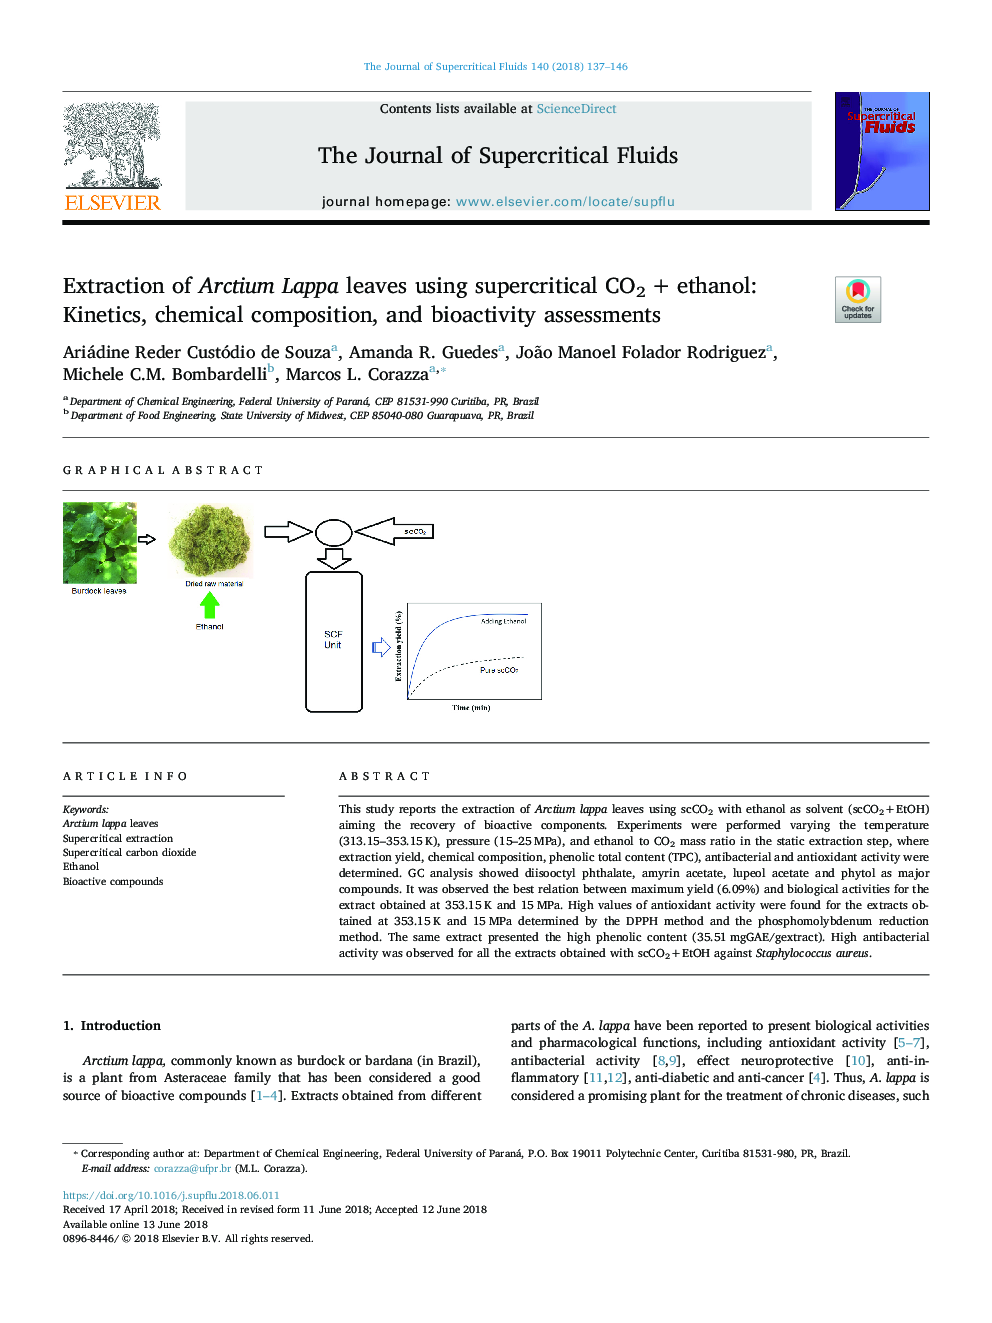 Extraction of Arctium Lappa leaves using supercritical CO2â¯+â¯ethanol: Kinetics, chemical composition, and bioactivity assessments